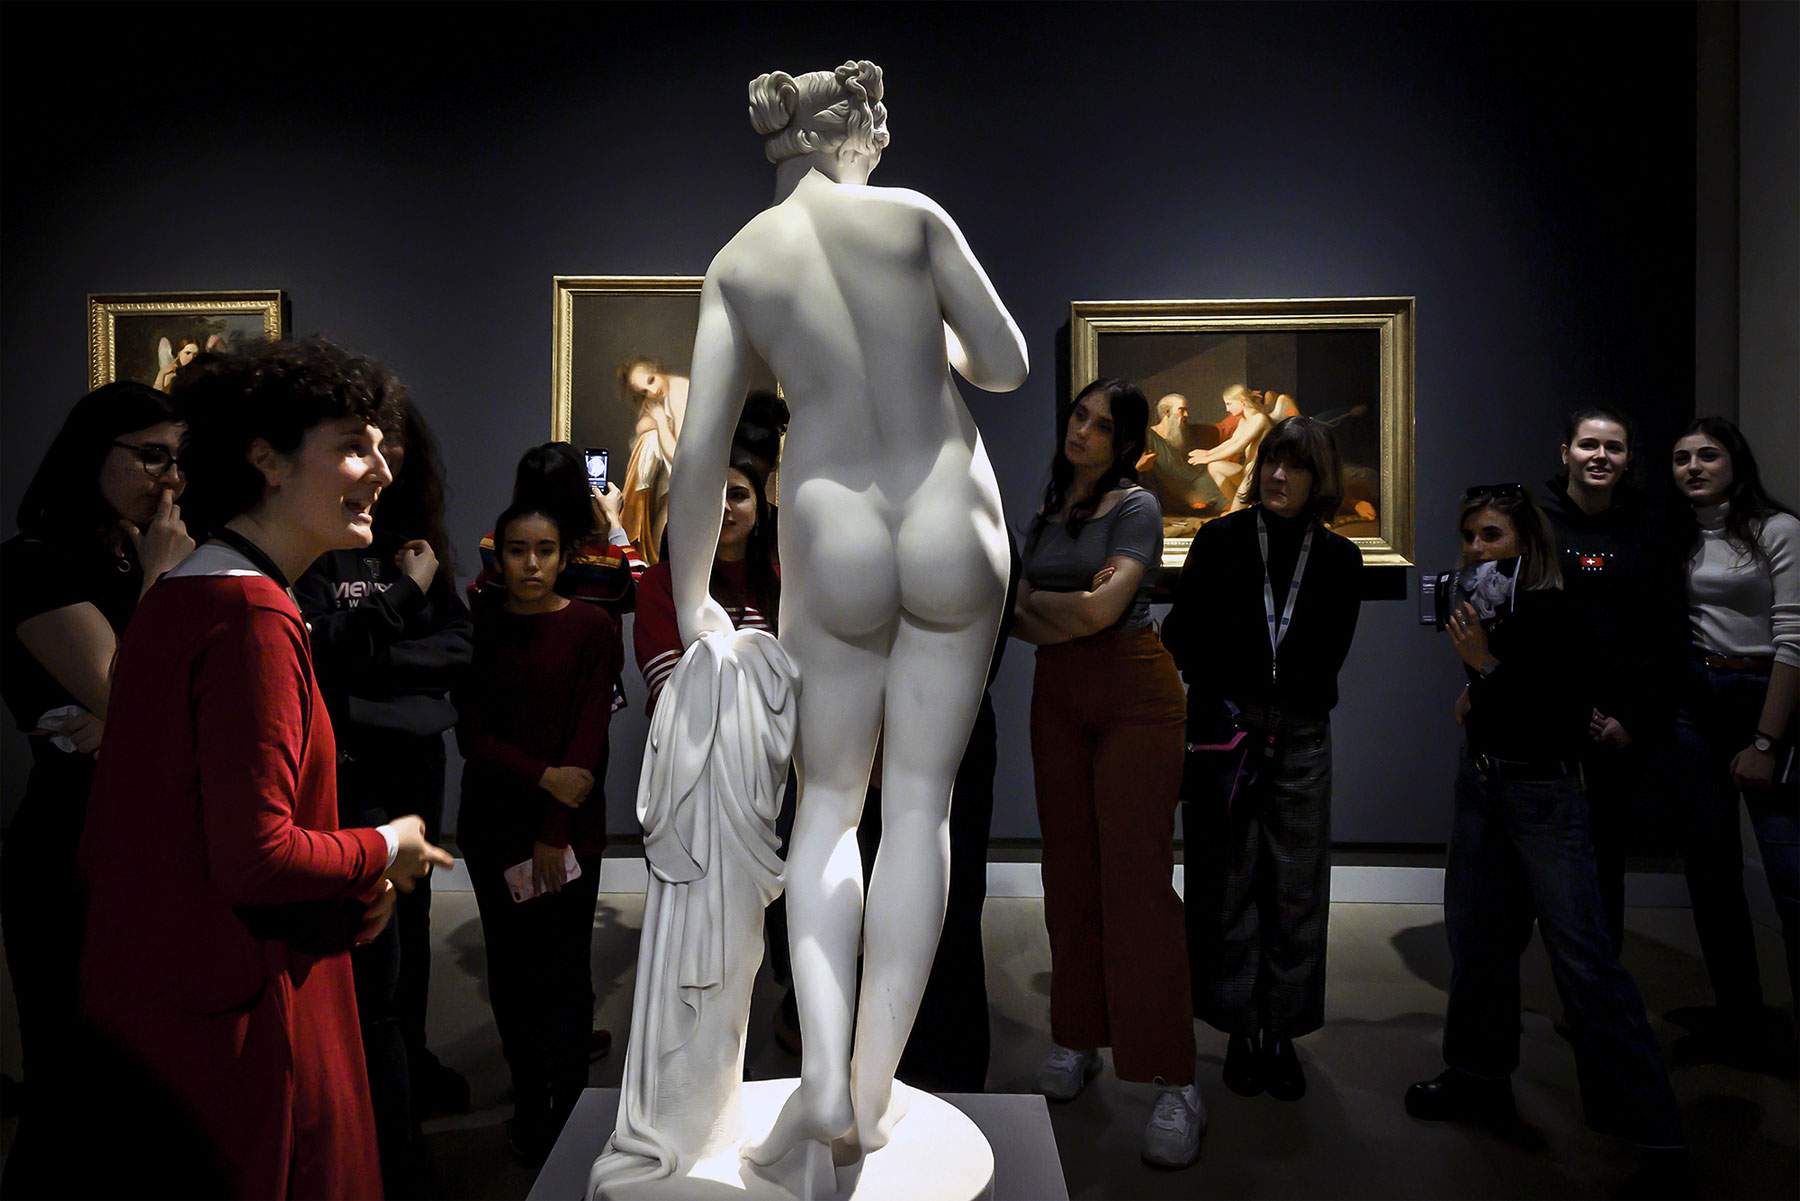 The woman? Almost absent from public statuary. An exhibition in Milan on women and sculpture